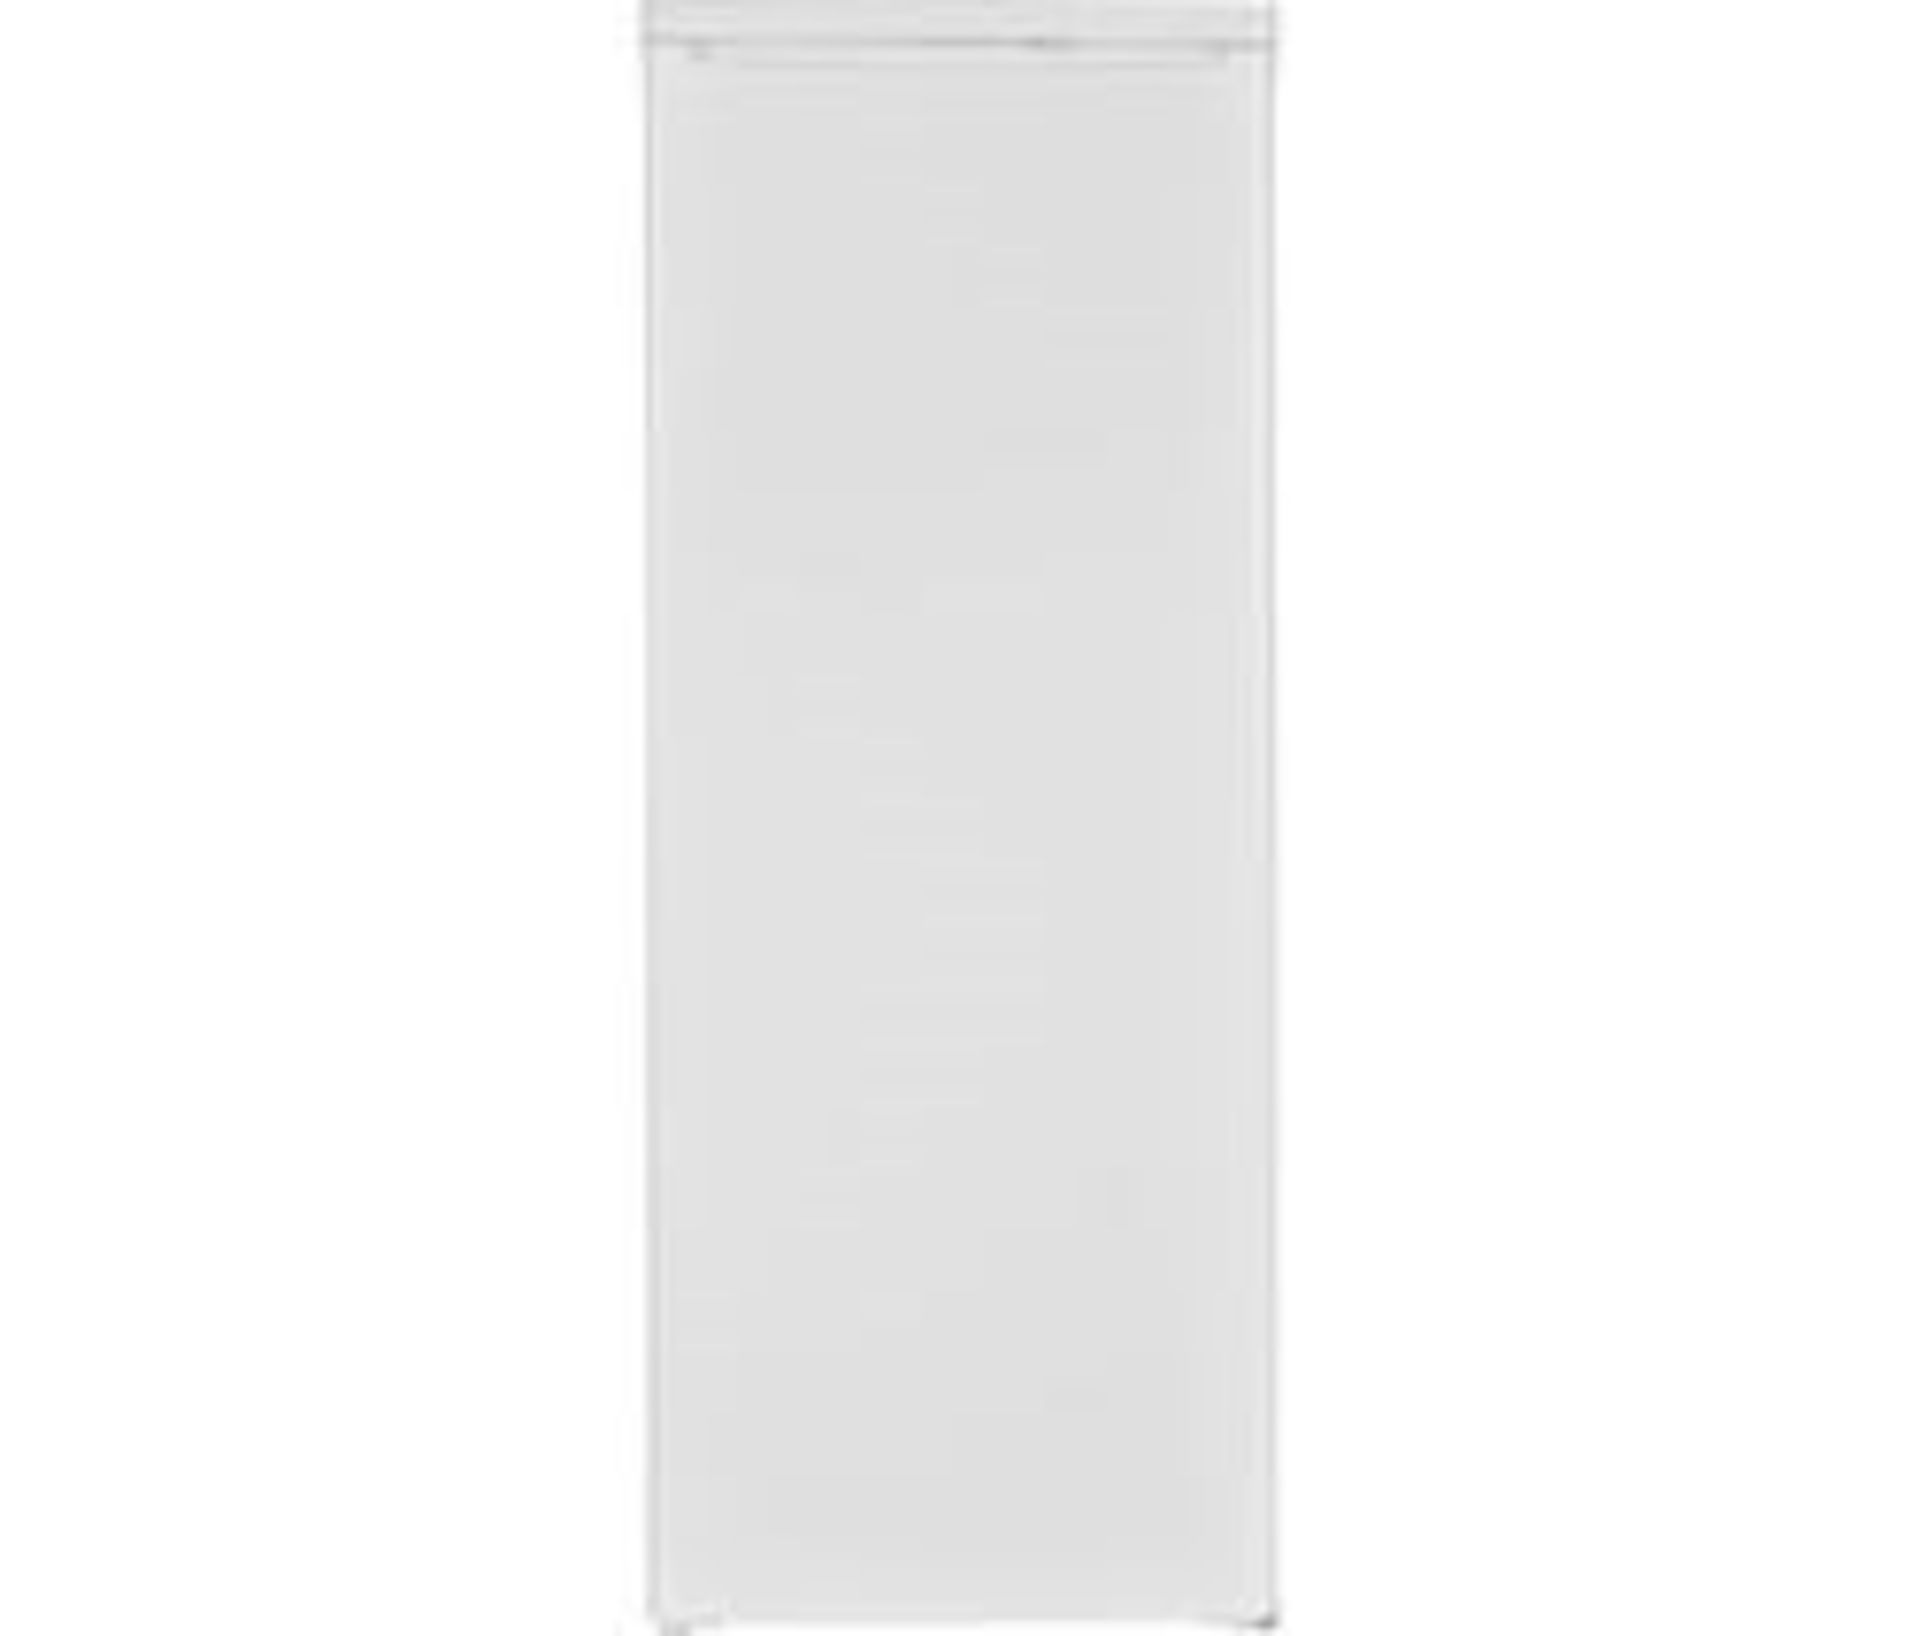 Pallet of mixed Fridges and Freezers, brands include Logik, Kenwood. Latest selling price £1,049.96